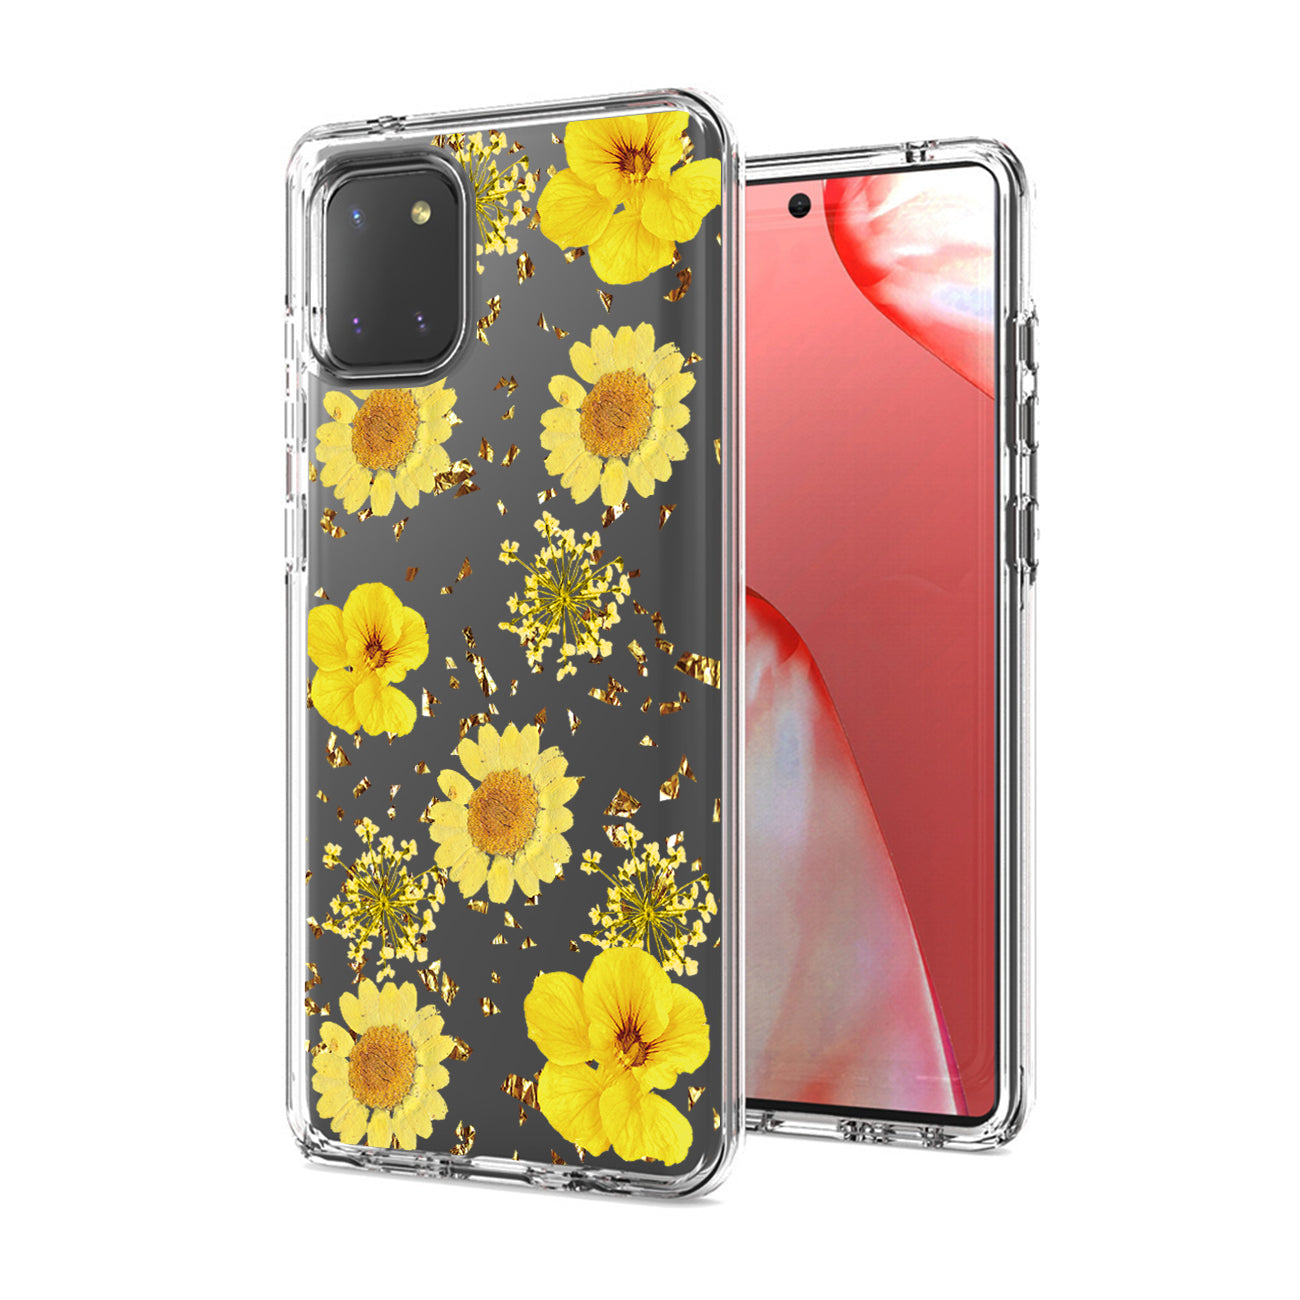 Pressed dried flower Design Phone case for SAMSUNG GALAXY A81/Note 10 Lite/M60S In Yellow